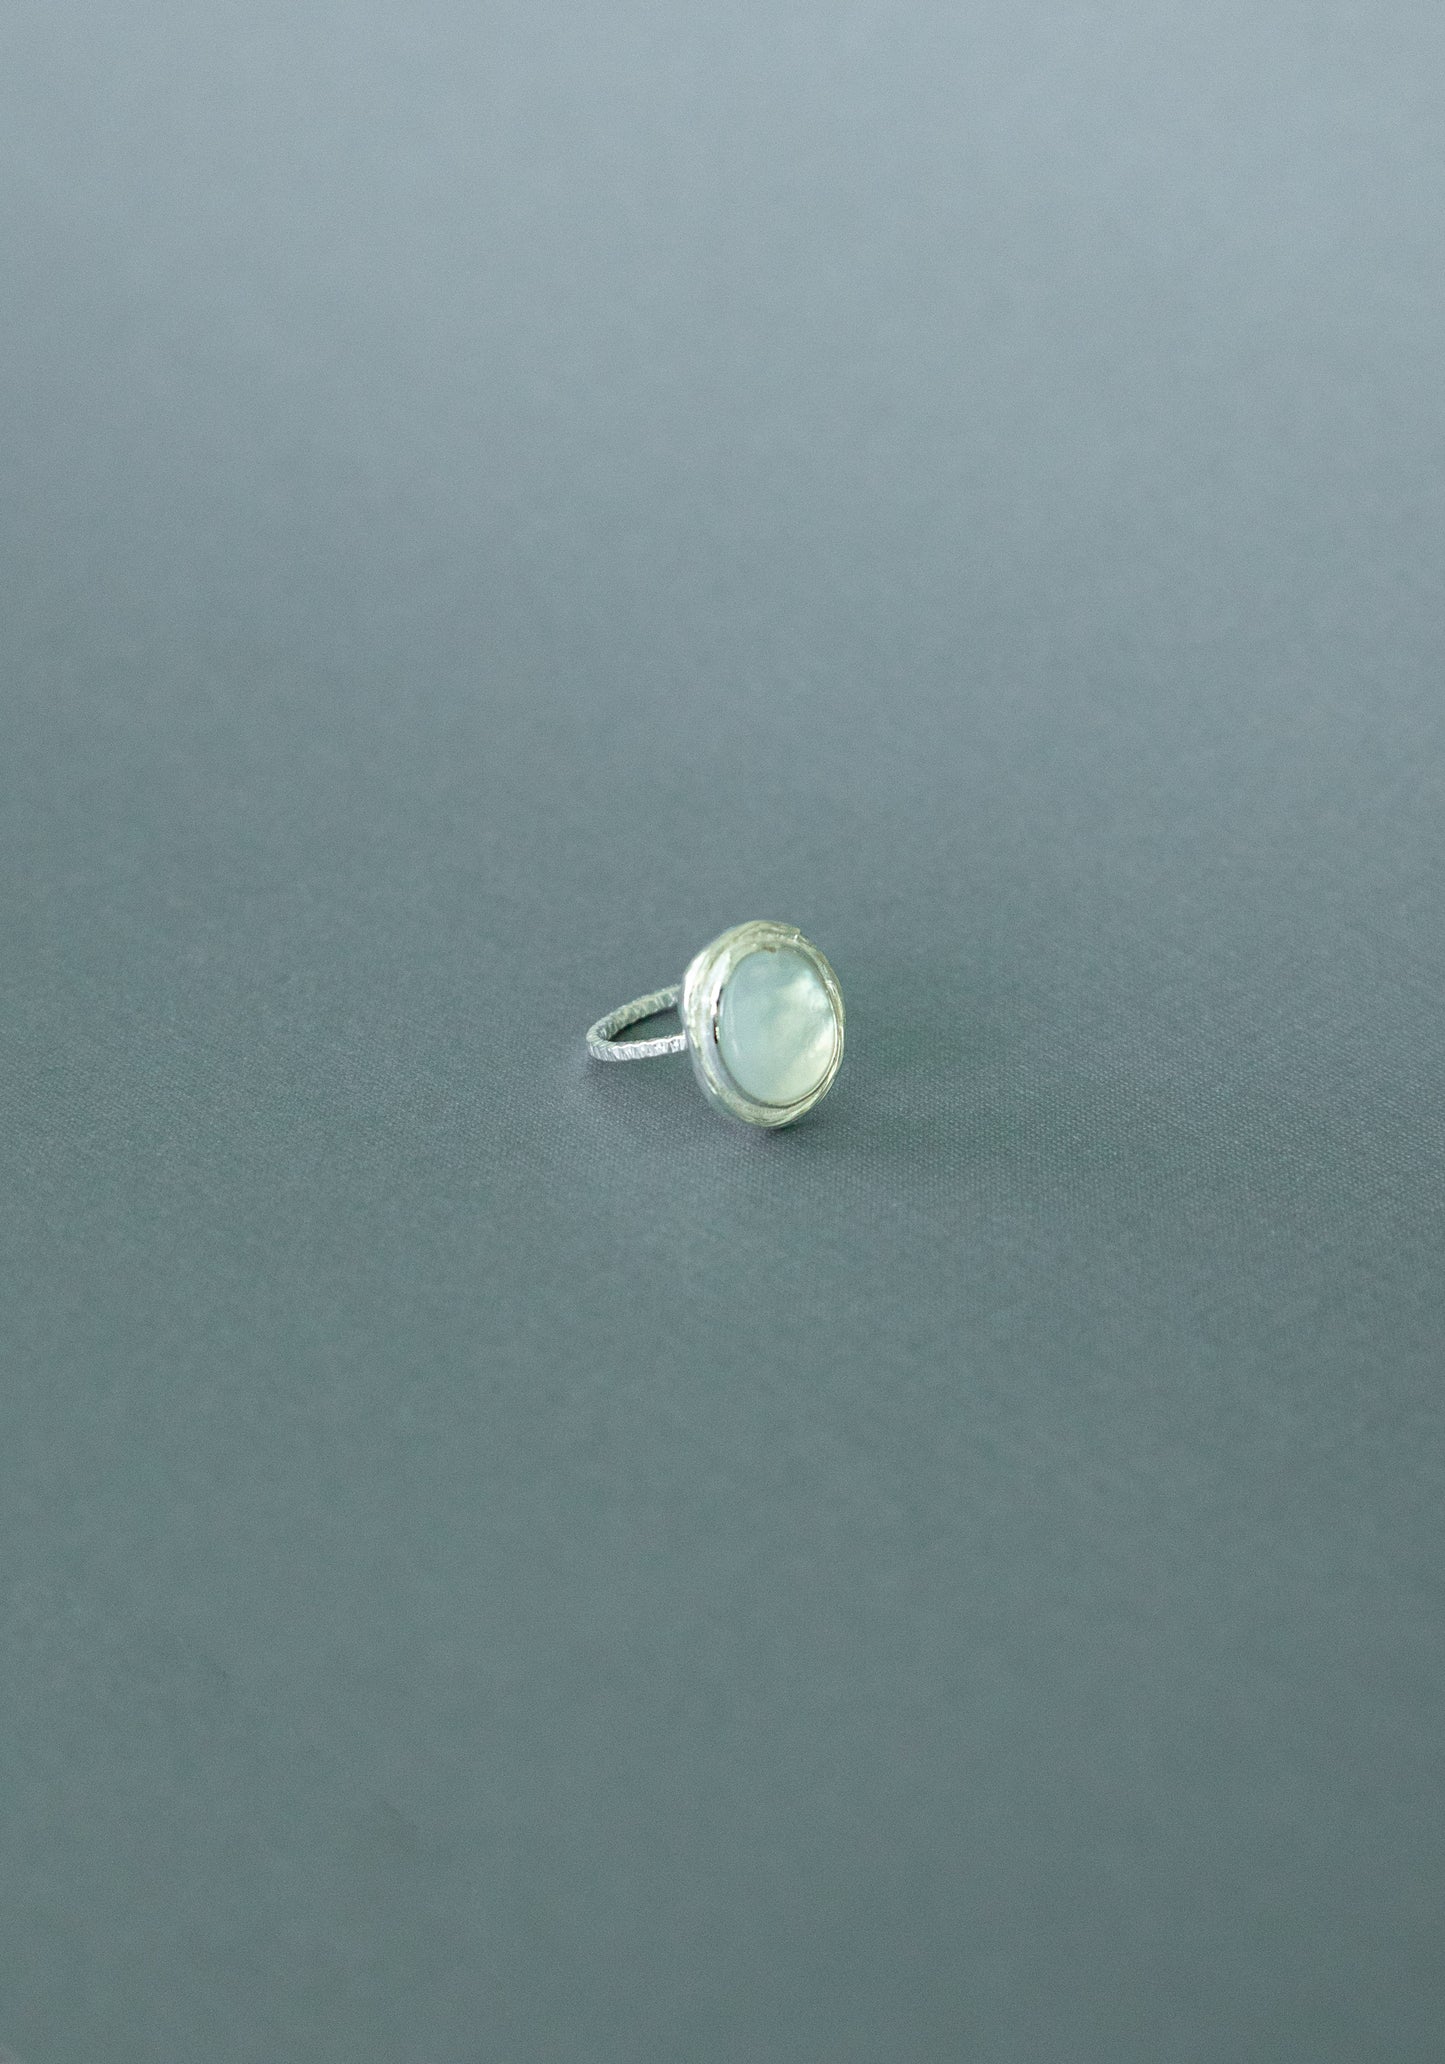 Moonstone and sterling silver .925